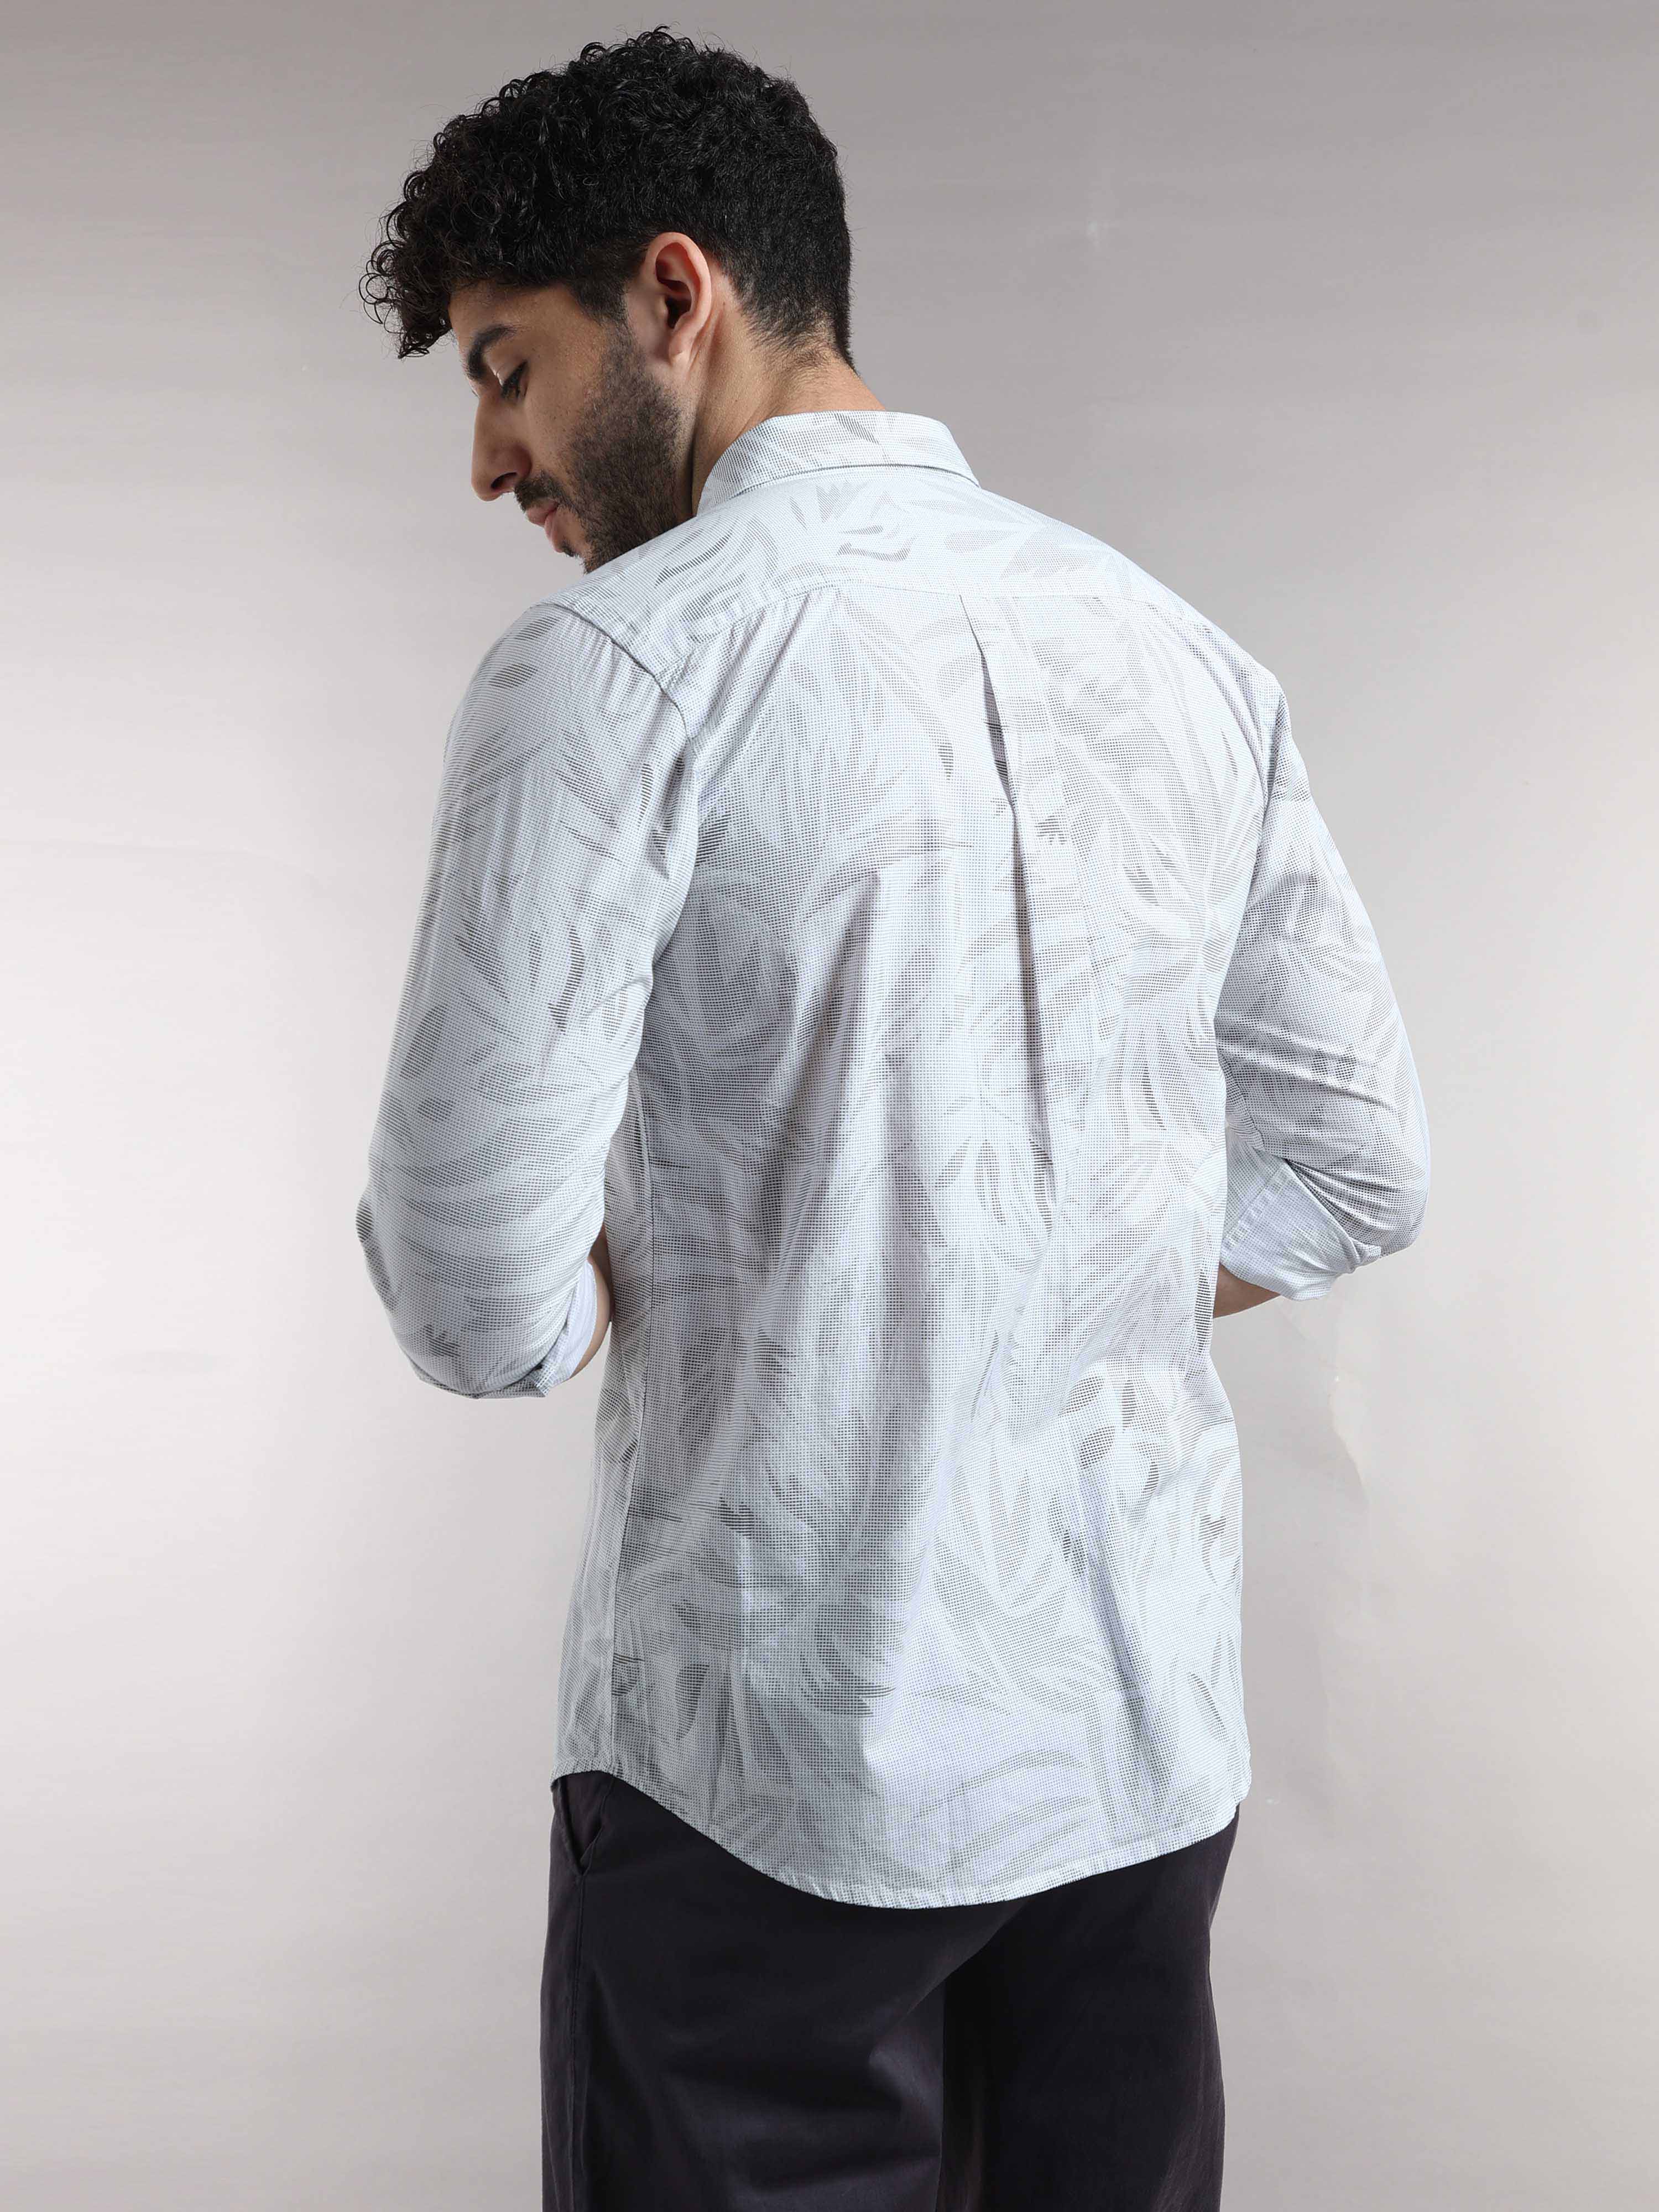 Shop Stylish White Printed Shirt Mens Online in IndiaRs. 1199.00